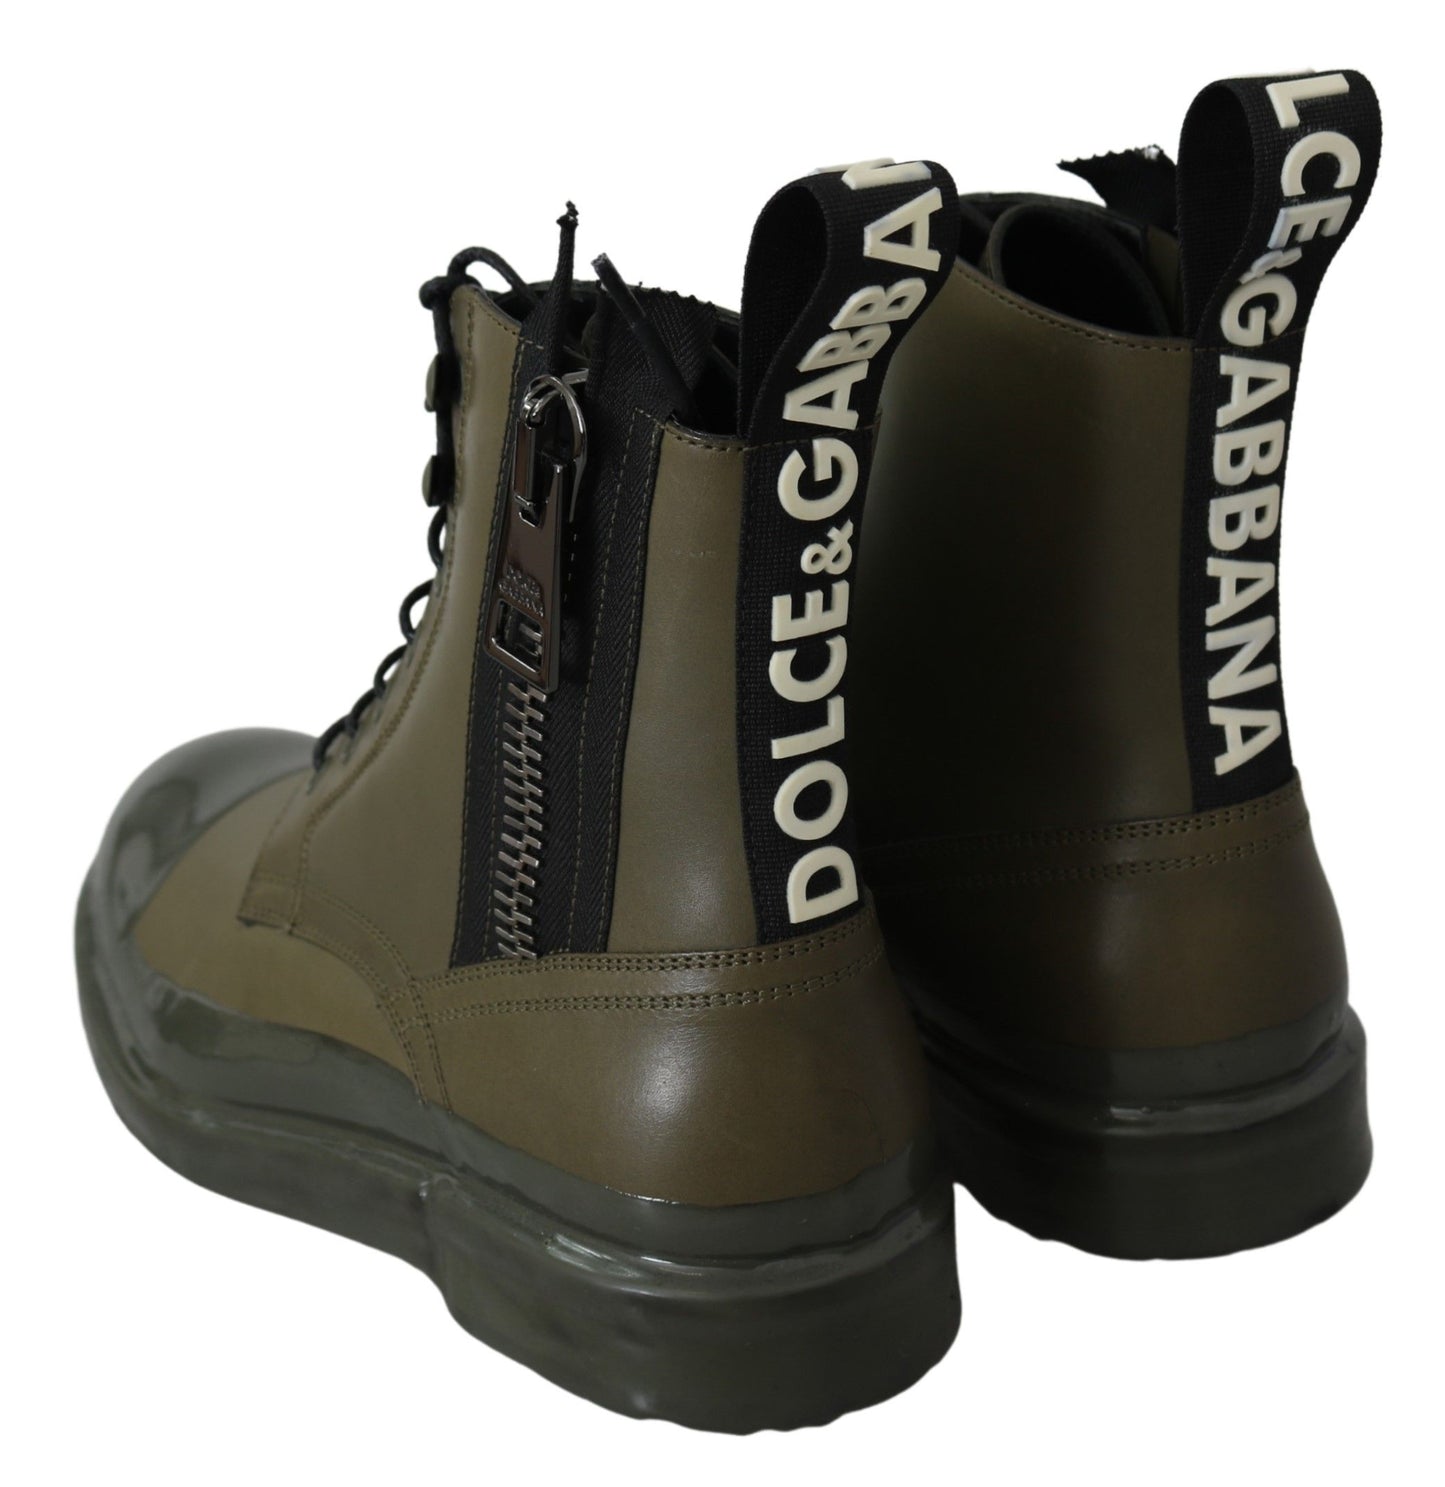 Dolce & Gabbana Chic Military Green Leather Ankle Boots